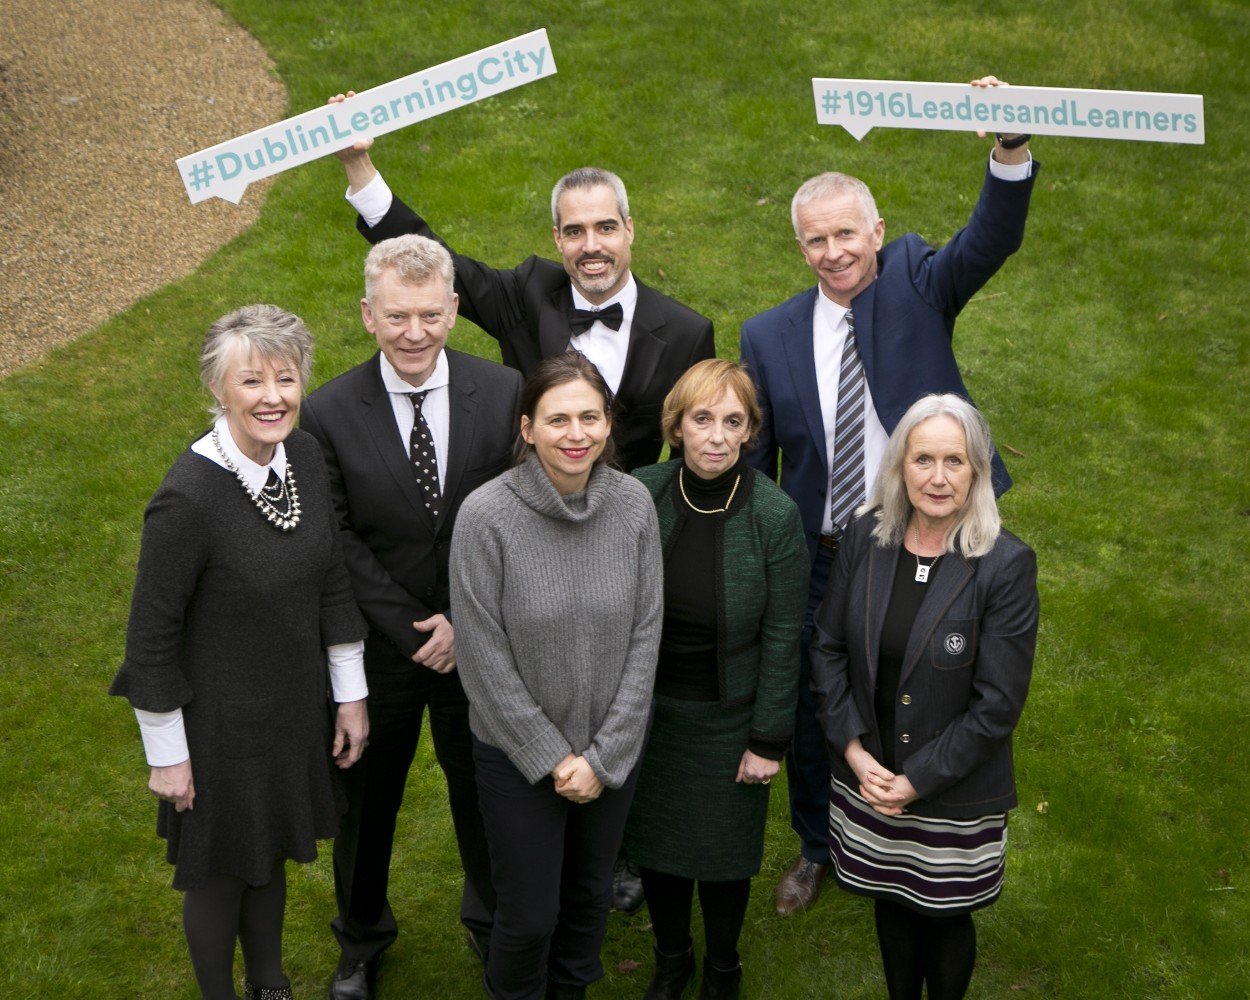 Pictured at the launch of Dublin Learning City (l-r): Dr. Anna Kelly, Chair at PATH Leinster Pillar 1 Consortium, UCD; Dr Andrew Power, Registrar and Vice President of Equality and Diversity, IADT; Professor Sarah Glennie, Director, NCAD; Professor Kevin Mitchell, Senior Lecturer, TCD; Professor Grace Mulcahy Chair, UCD Widening Participation Committee; Dr Gene Mehigan, Principal Lecturer & Director of Postgraduate Studies, MIE; and Dr Annie Doona, President of IADT.